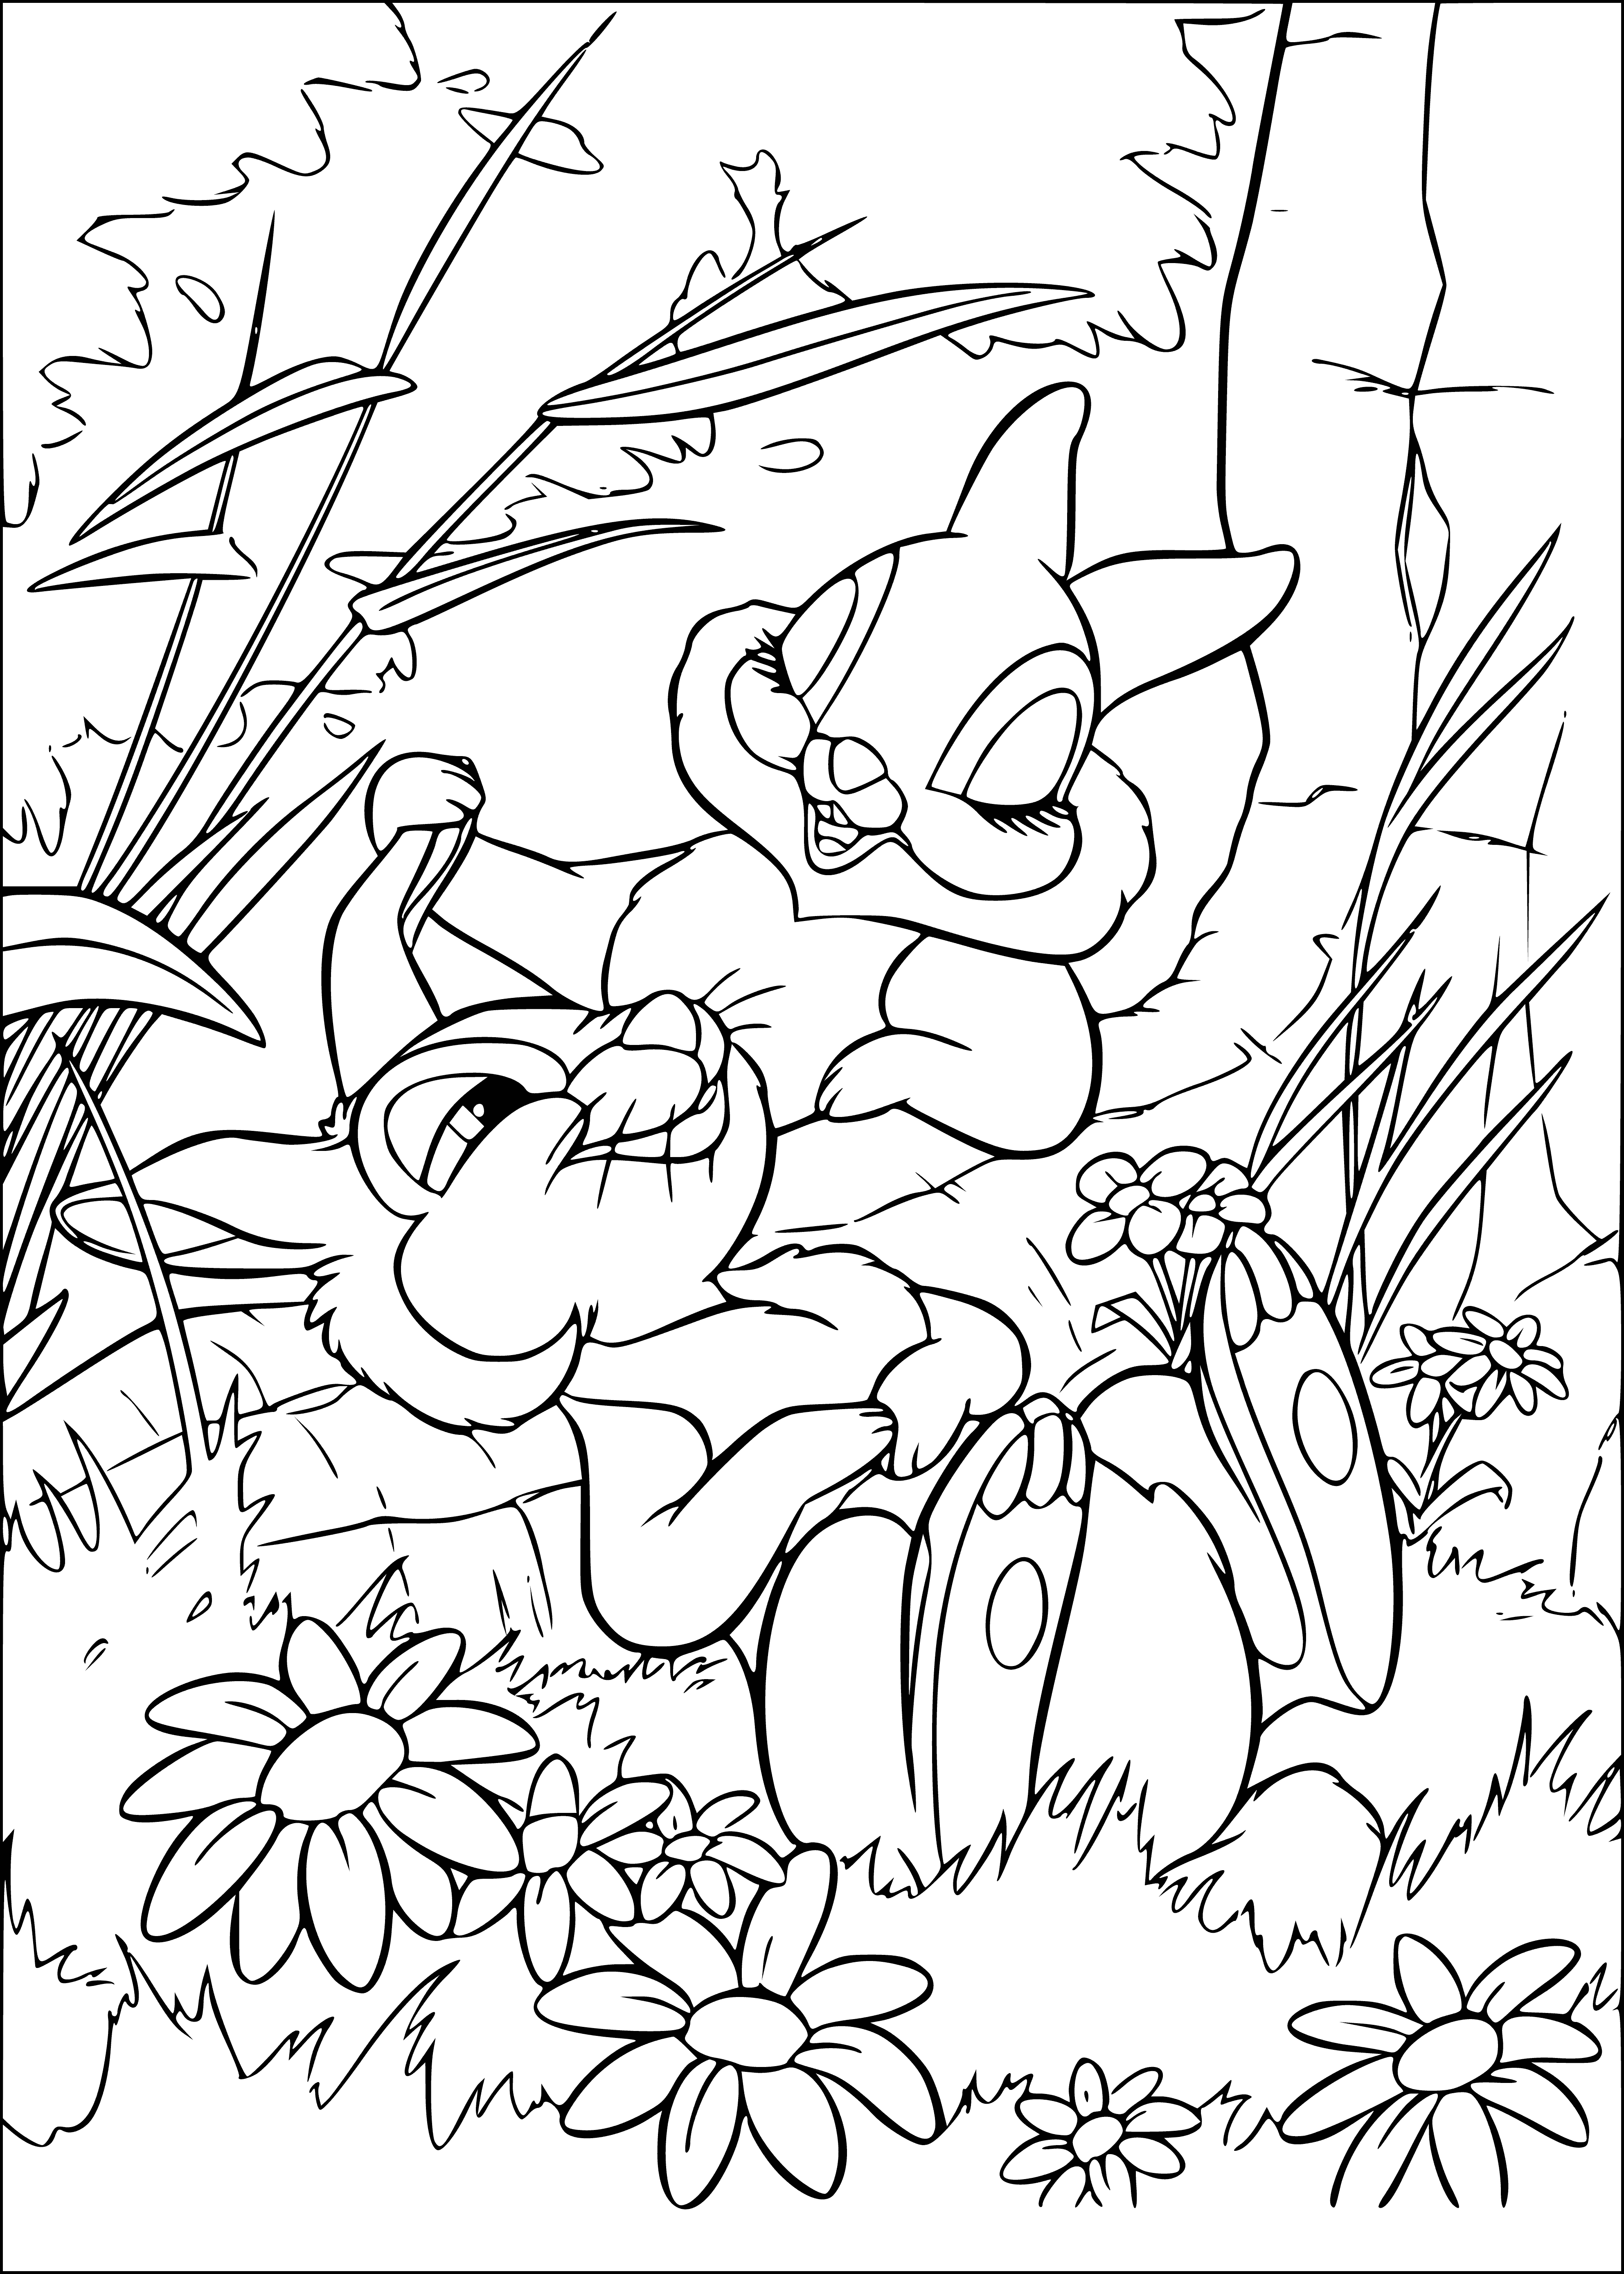 Hare and hare coloring page